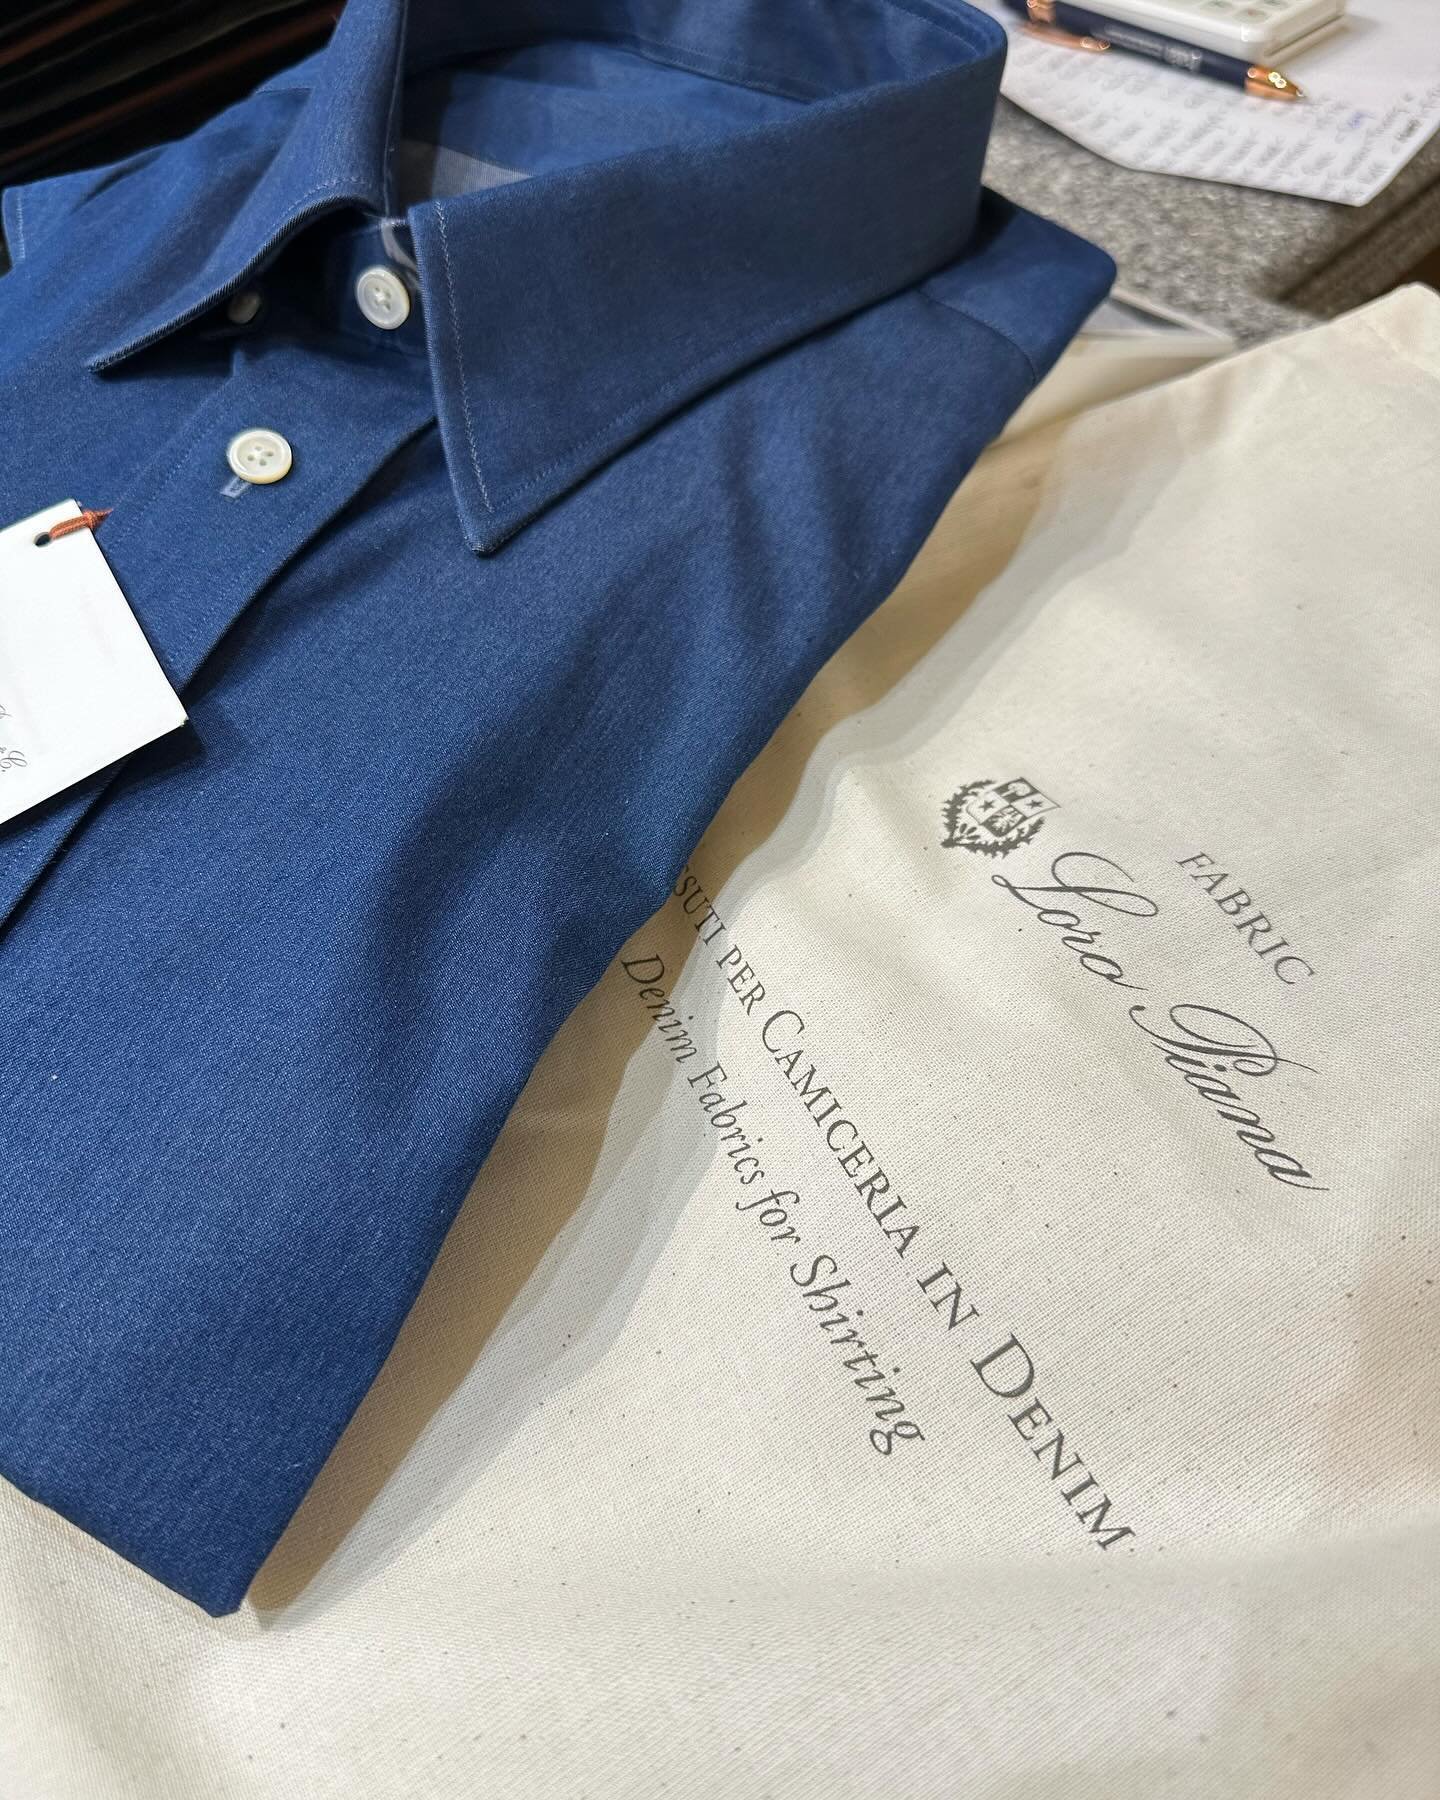 These made to measure denim shirts are proving very popular with our clients.  Perfect for a dress down day in the office with Chinos or just casually at the weekend.  Super comfy, great colour and they take on their own patina as you wash and wear.
